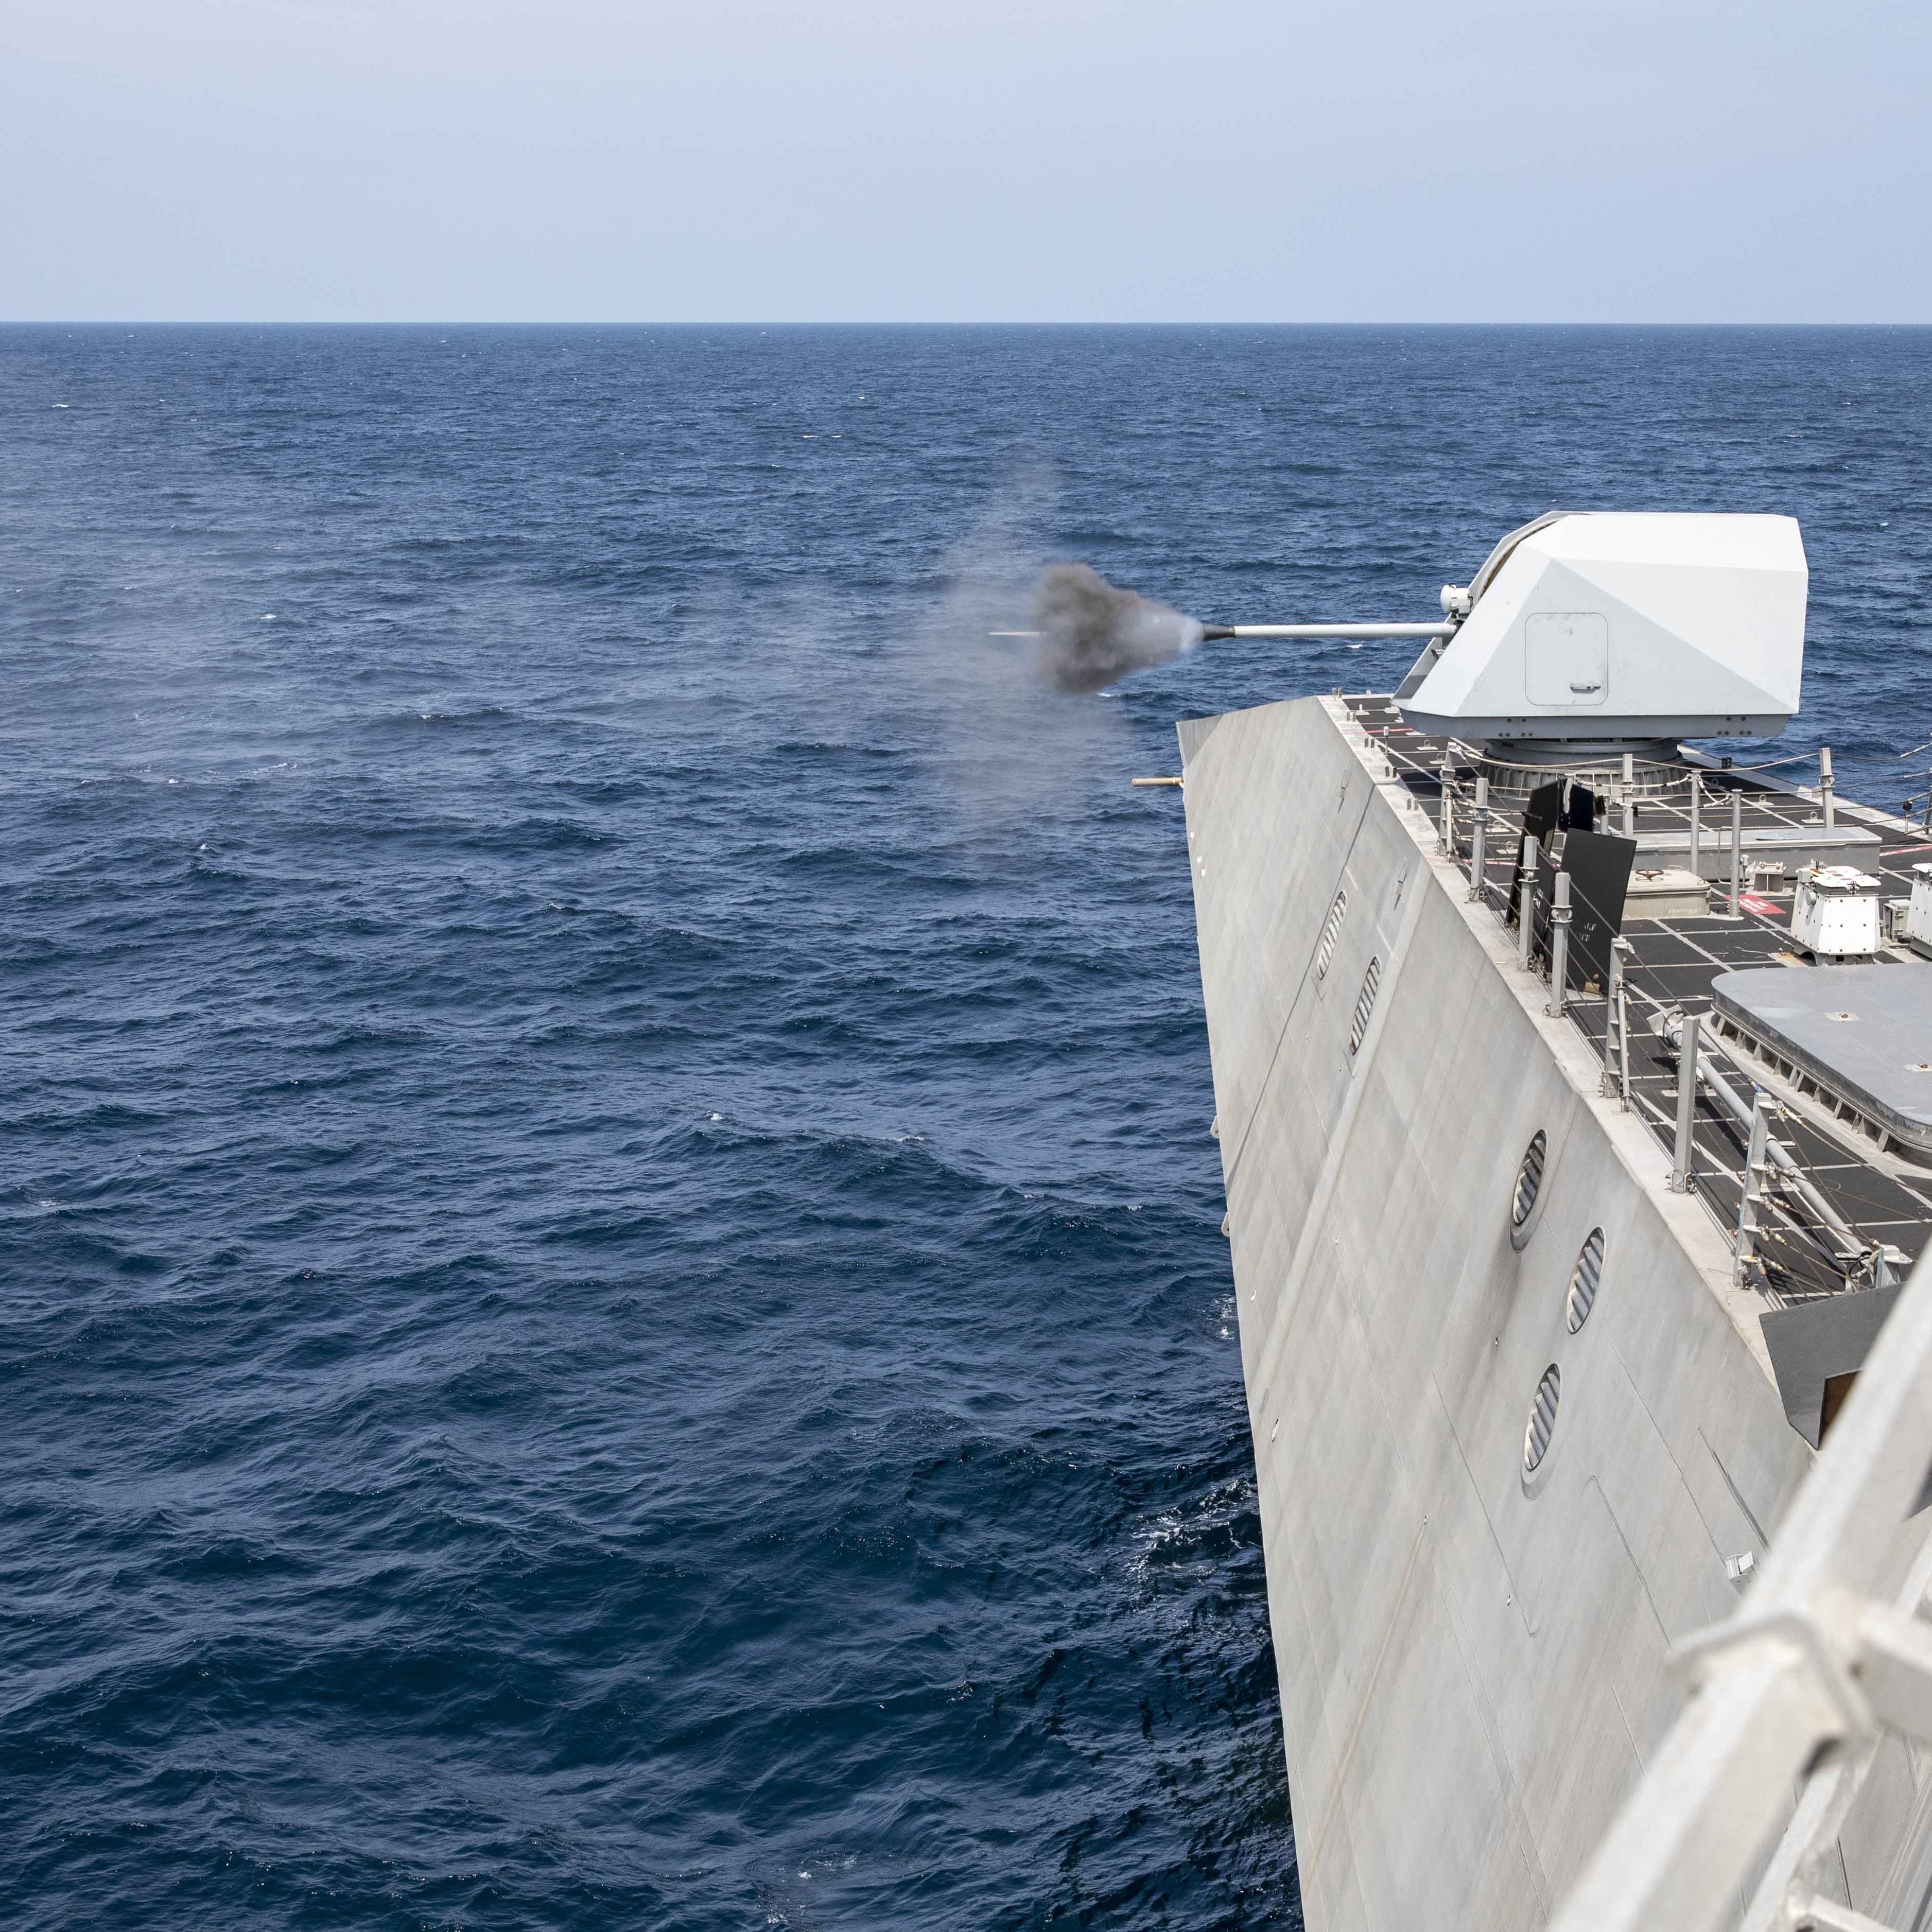 The Navy's New Guided Cannon Shells Will Make Some of Its Ships' Guns as Accurate as Missiles